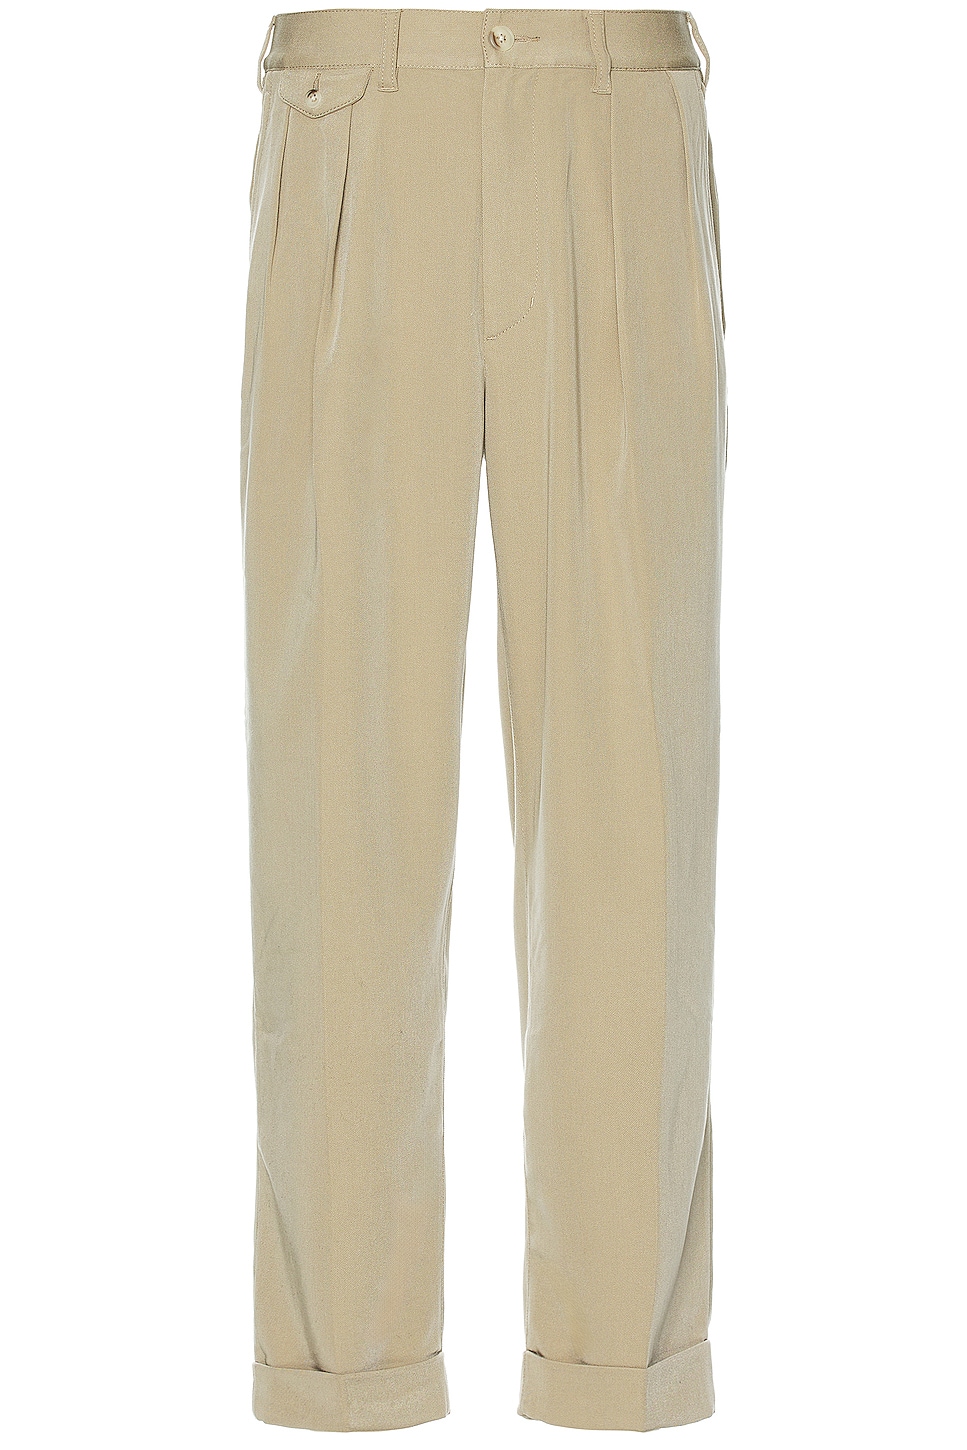 Image 1 of Beams Plus 2 Pleats Trousers Pe Twill in Sand